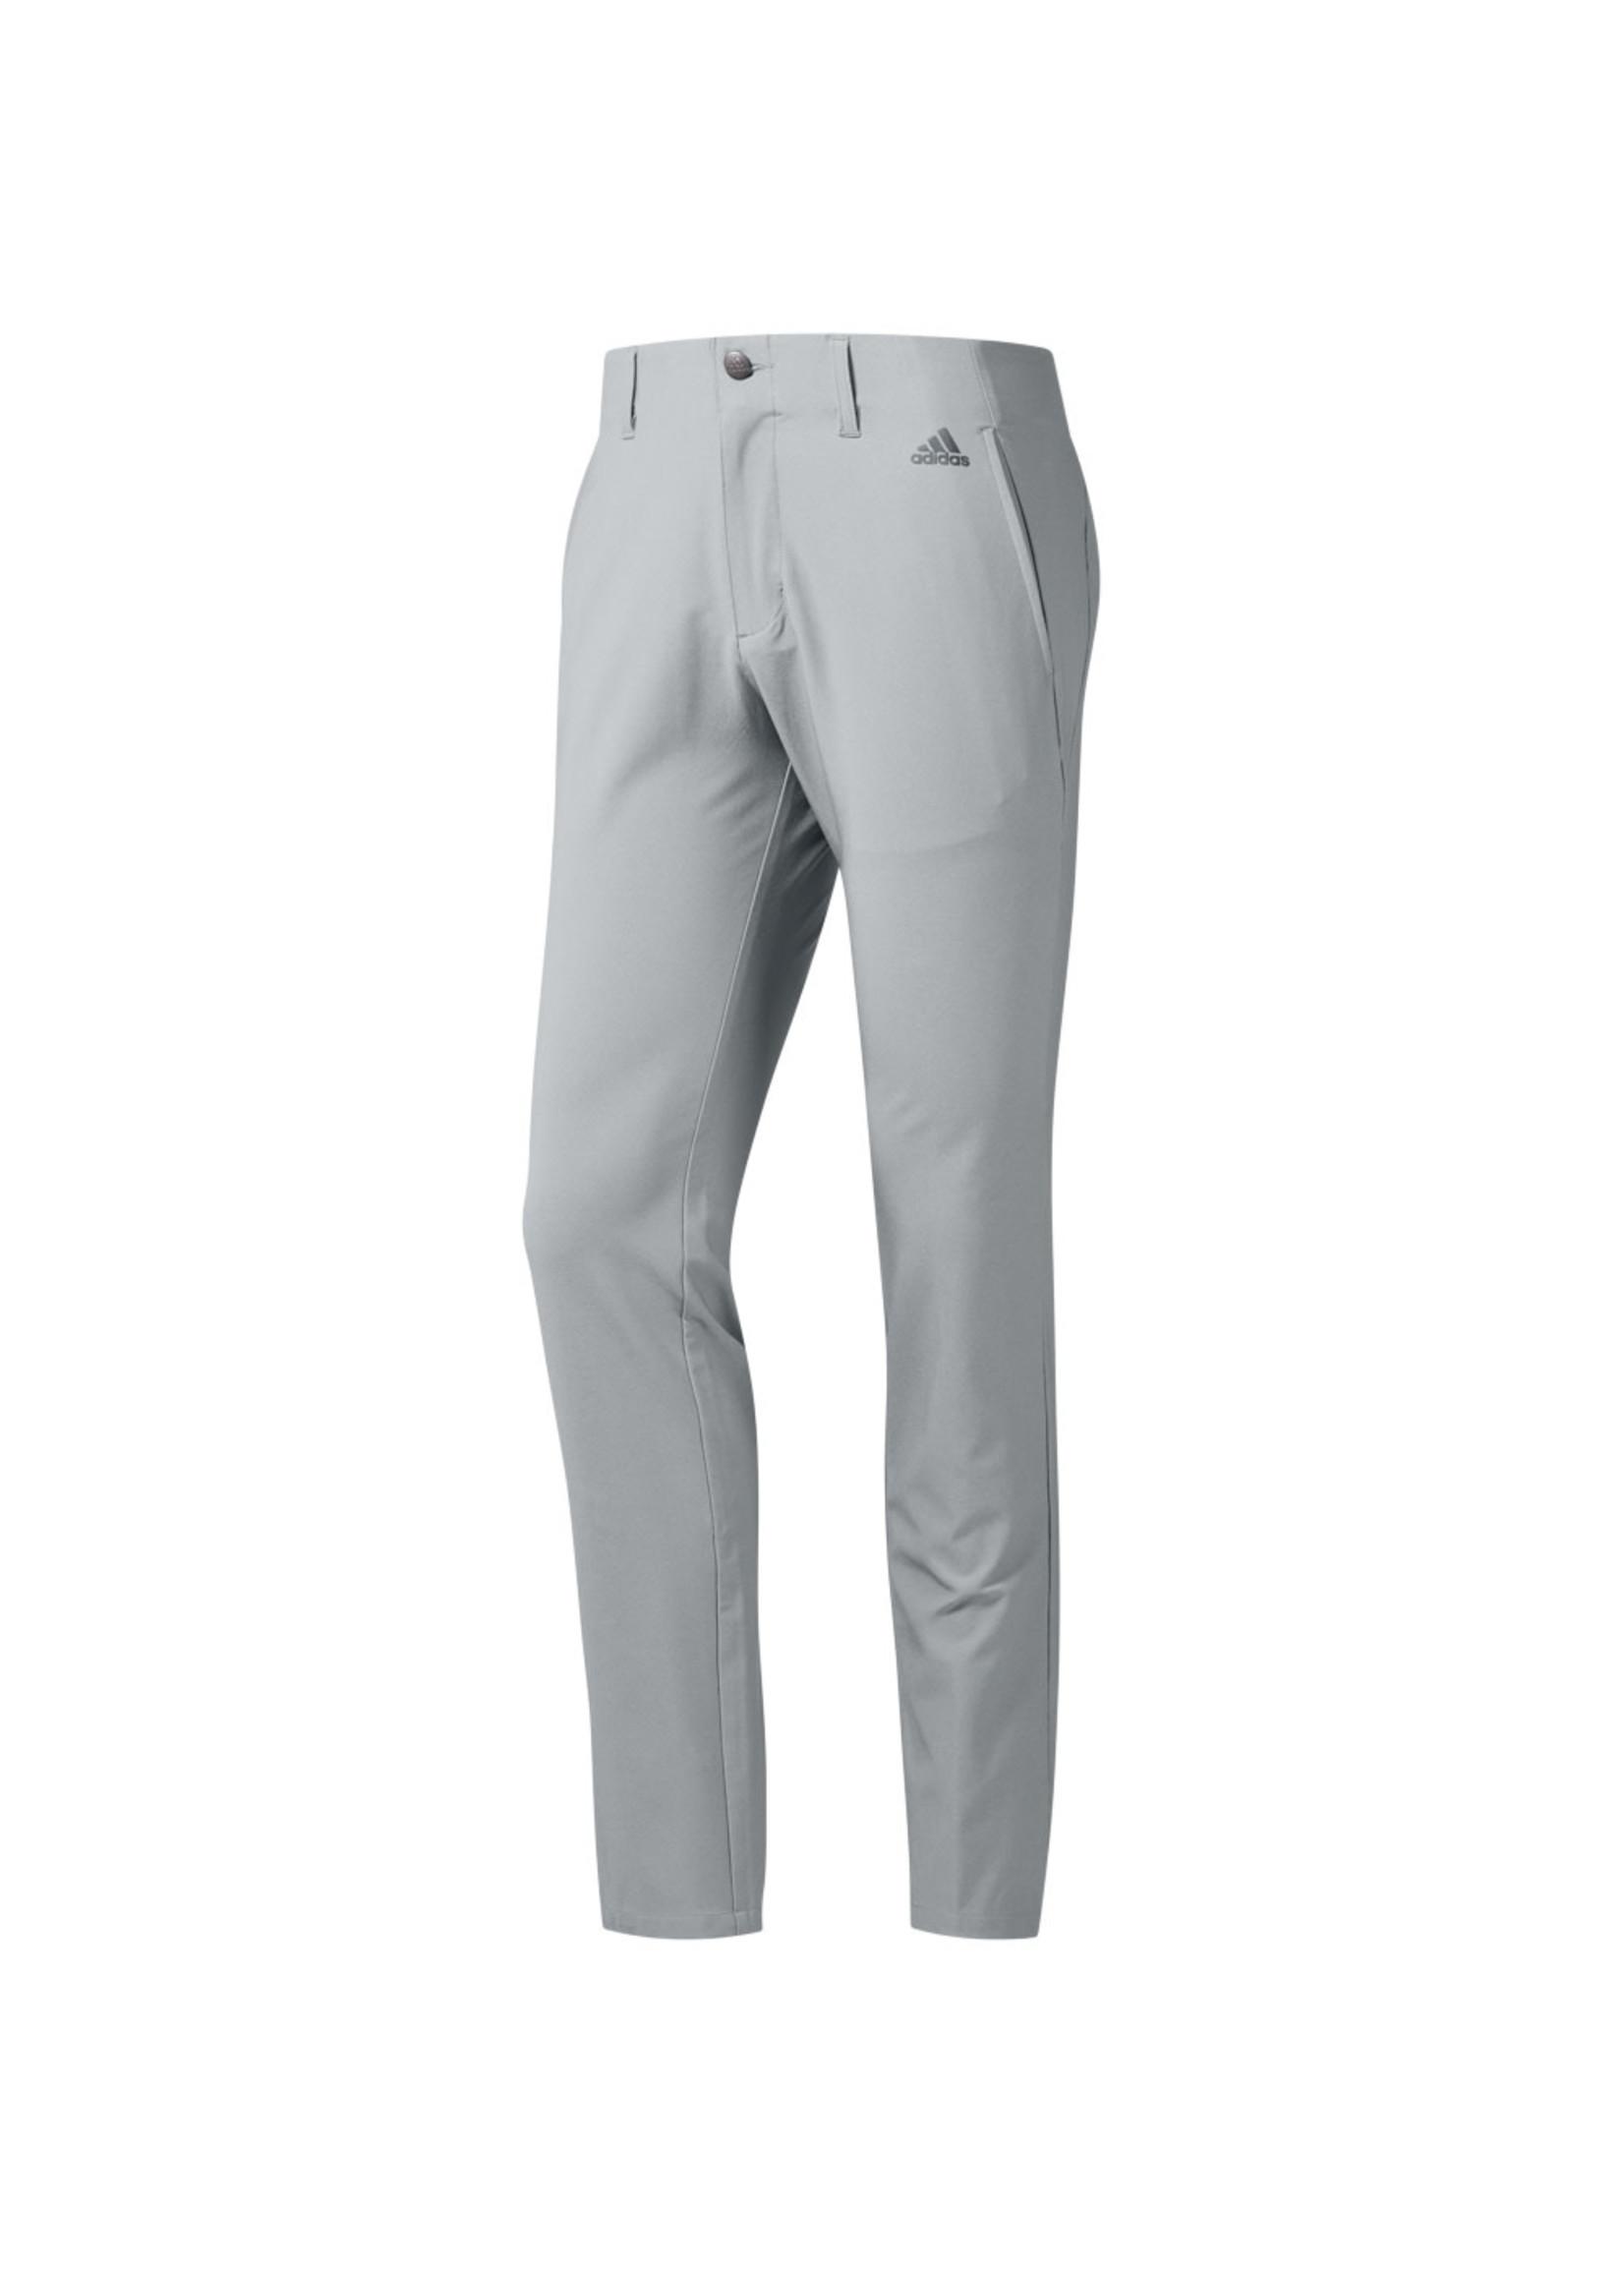 Adidas Adidas Mens Ultimate365 3 Stripe Tapered Golf Trouser, Grey